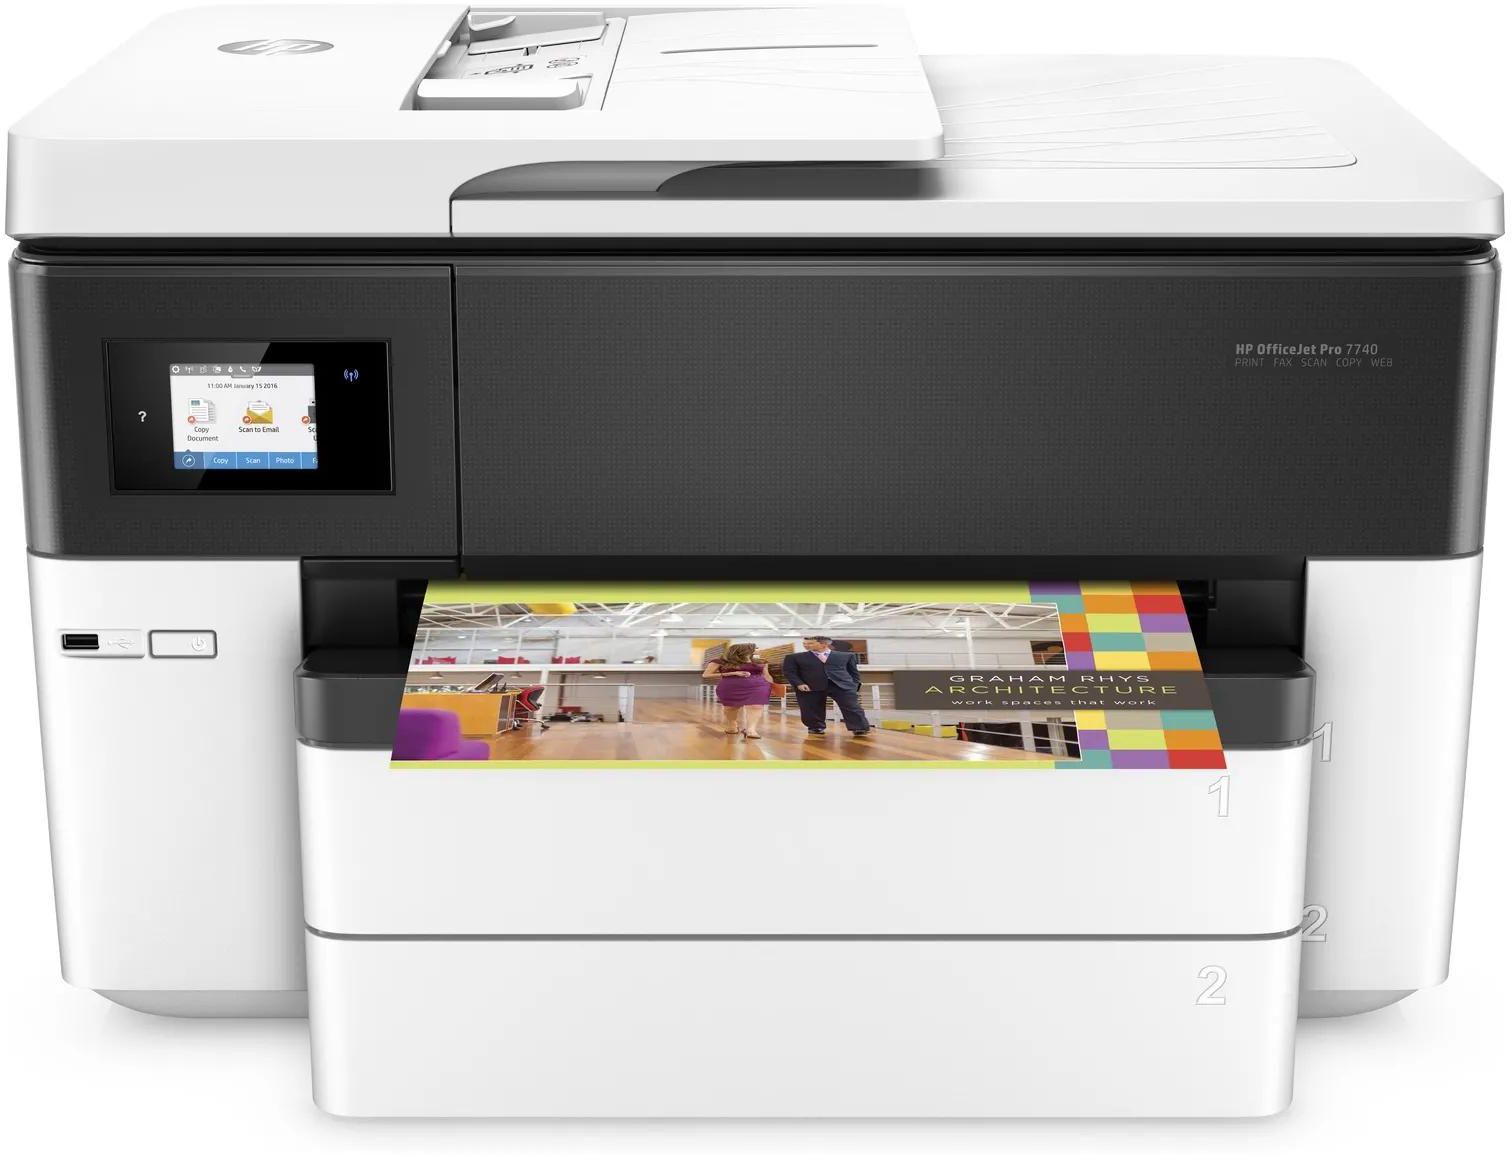 HP OfficeJet Pro 7740 Wide Format All-in-One Printer – (G5J38A) White